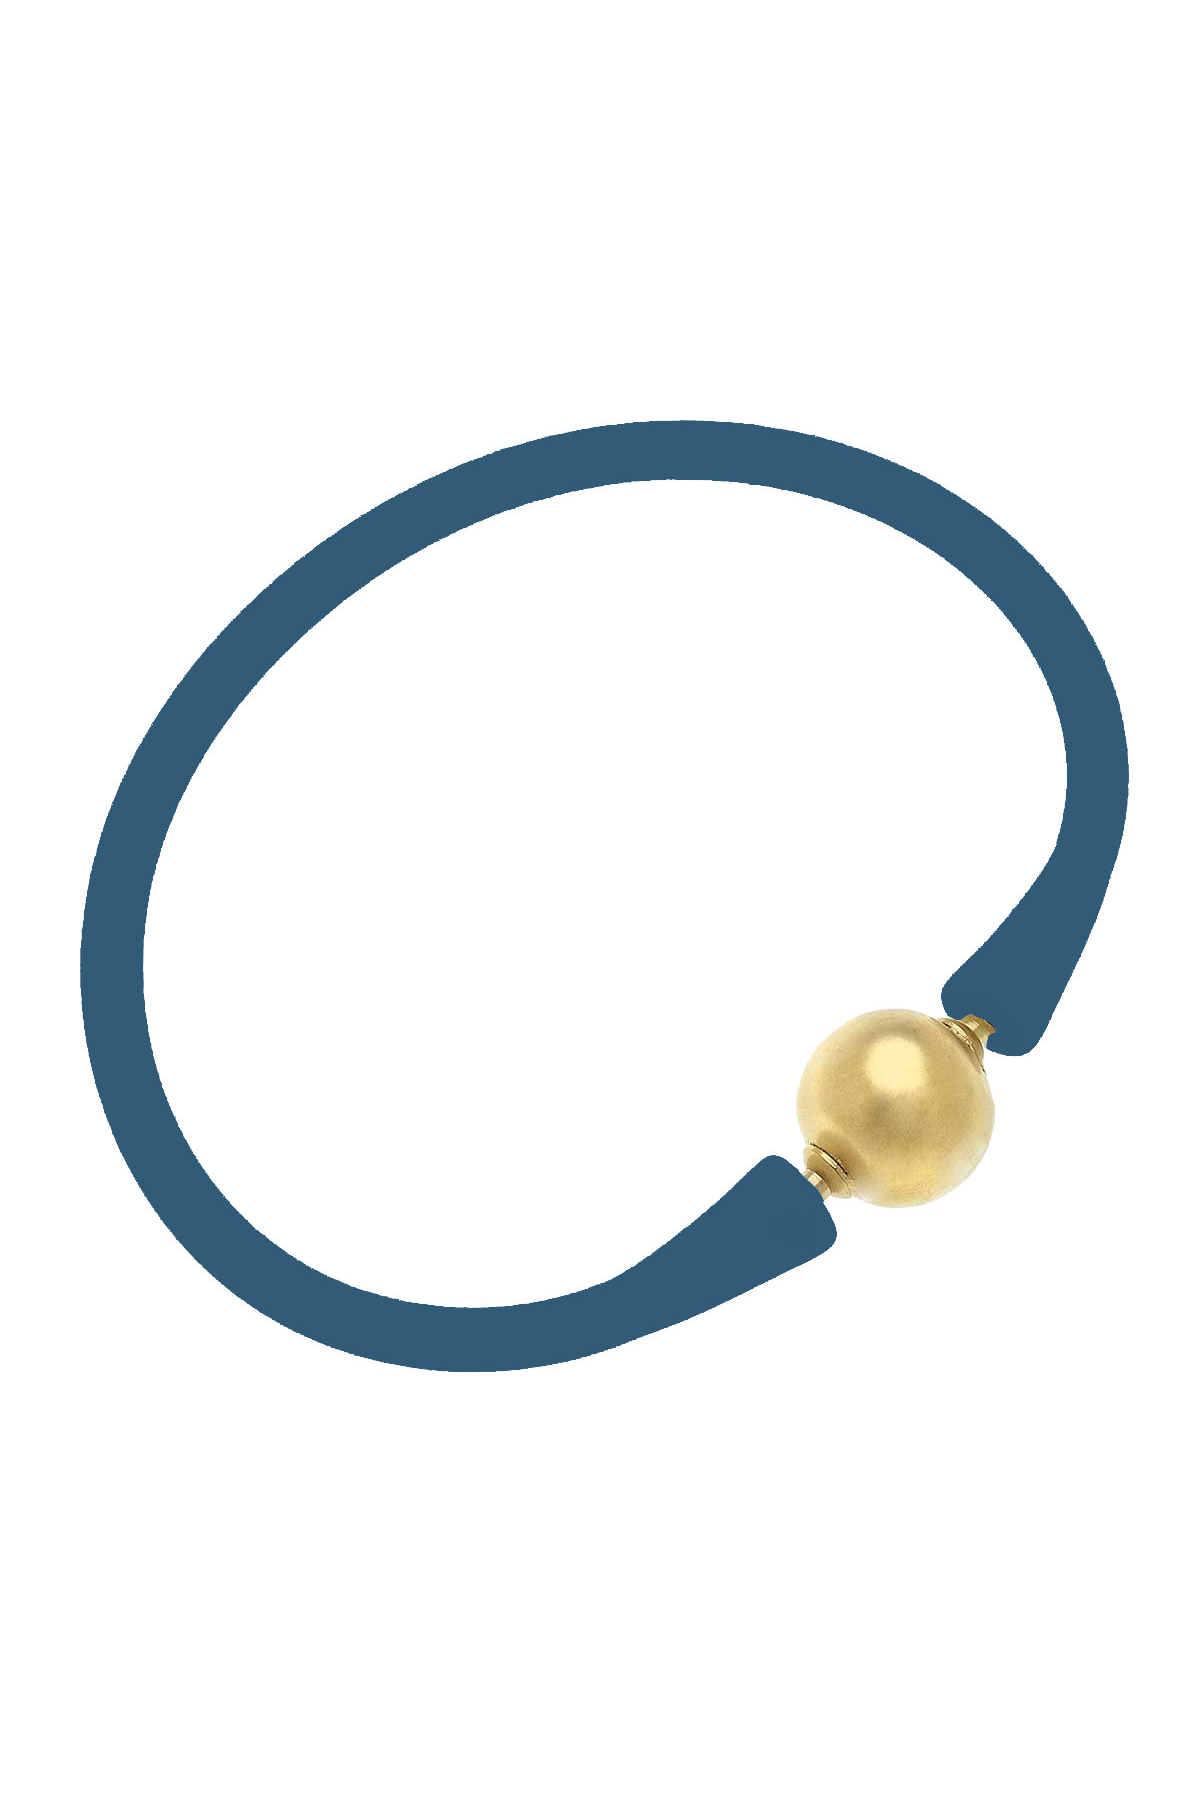 Bali 24K Gold Plated Ball Bead Silicone Bracelet in Midnight Blue